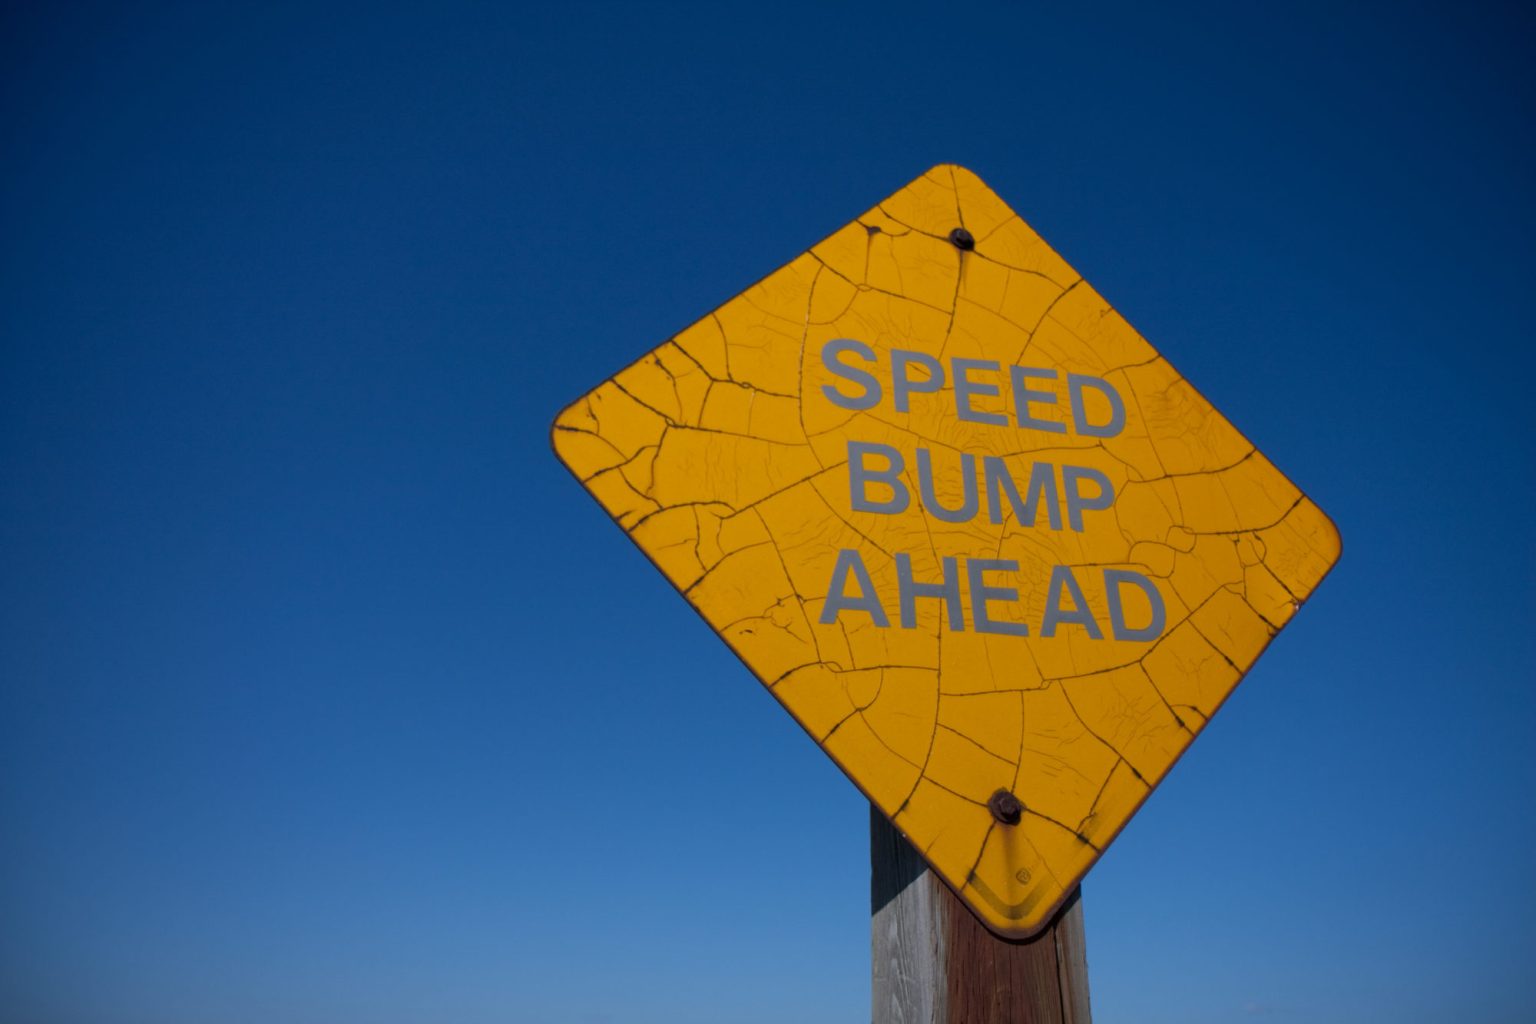 Sign for speed bumps ahead